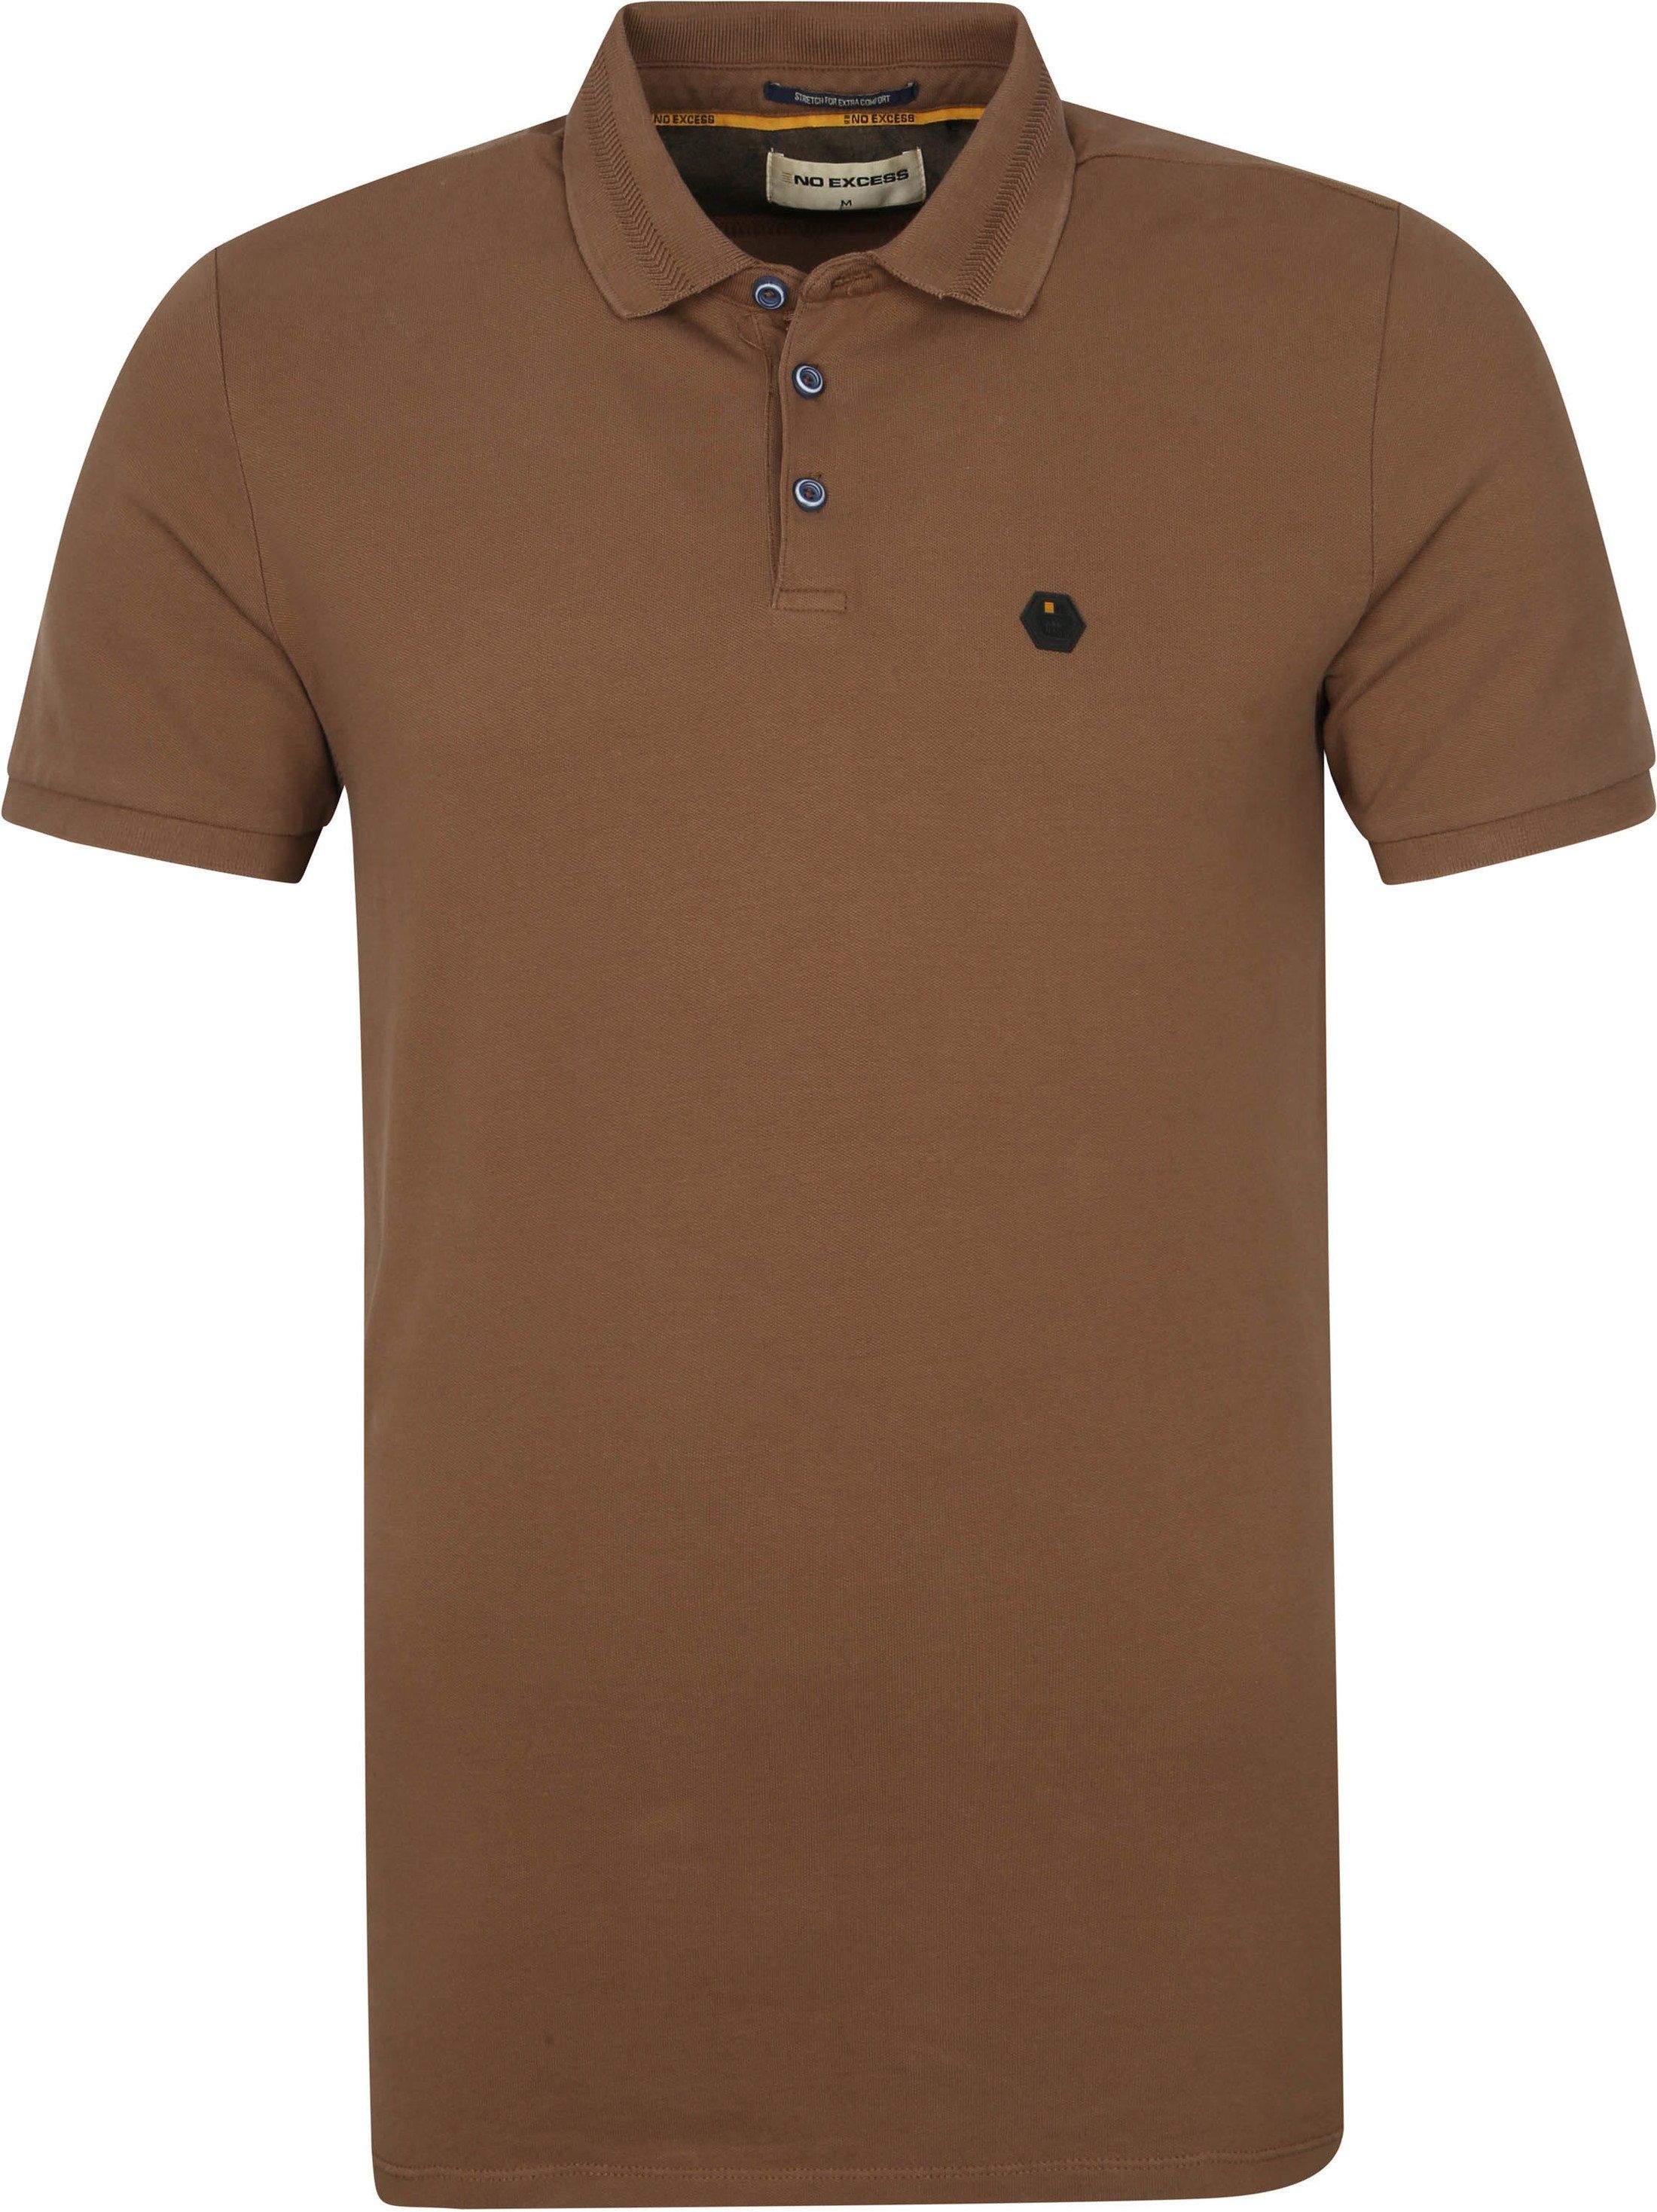 No-Excess Polo Shirt Stone Washed Camel Brown size M